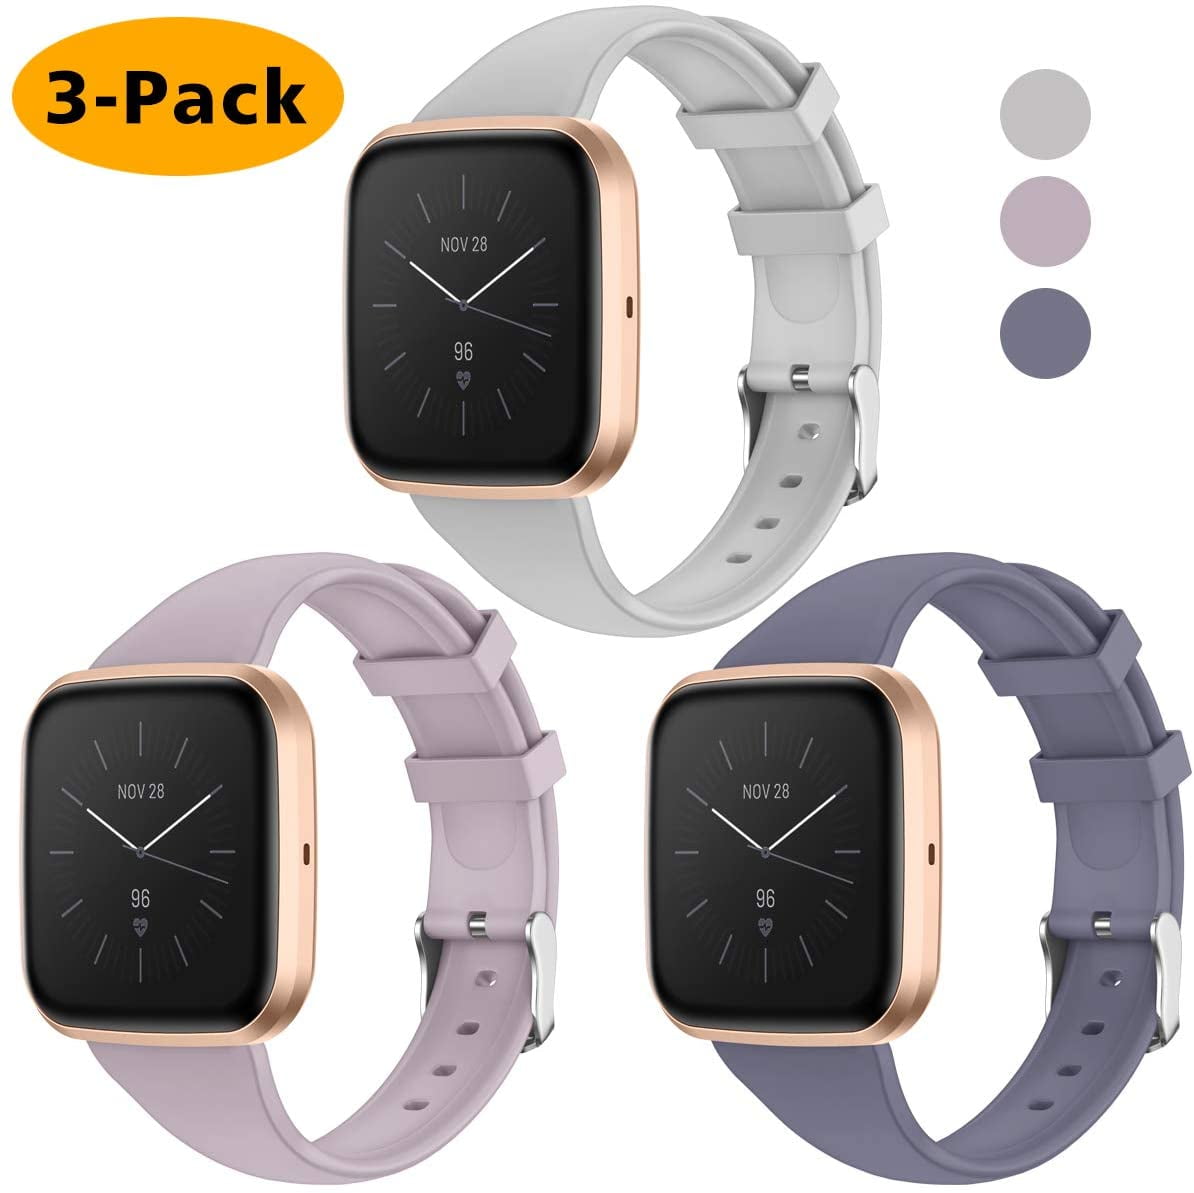 is the fitbit versa 2 special edition waterproof